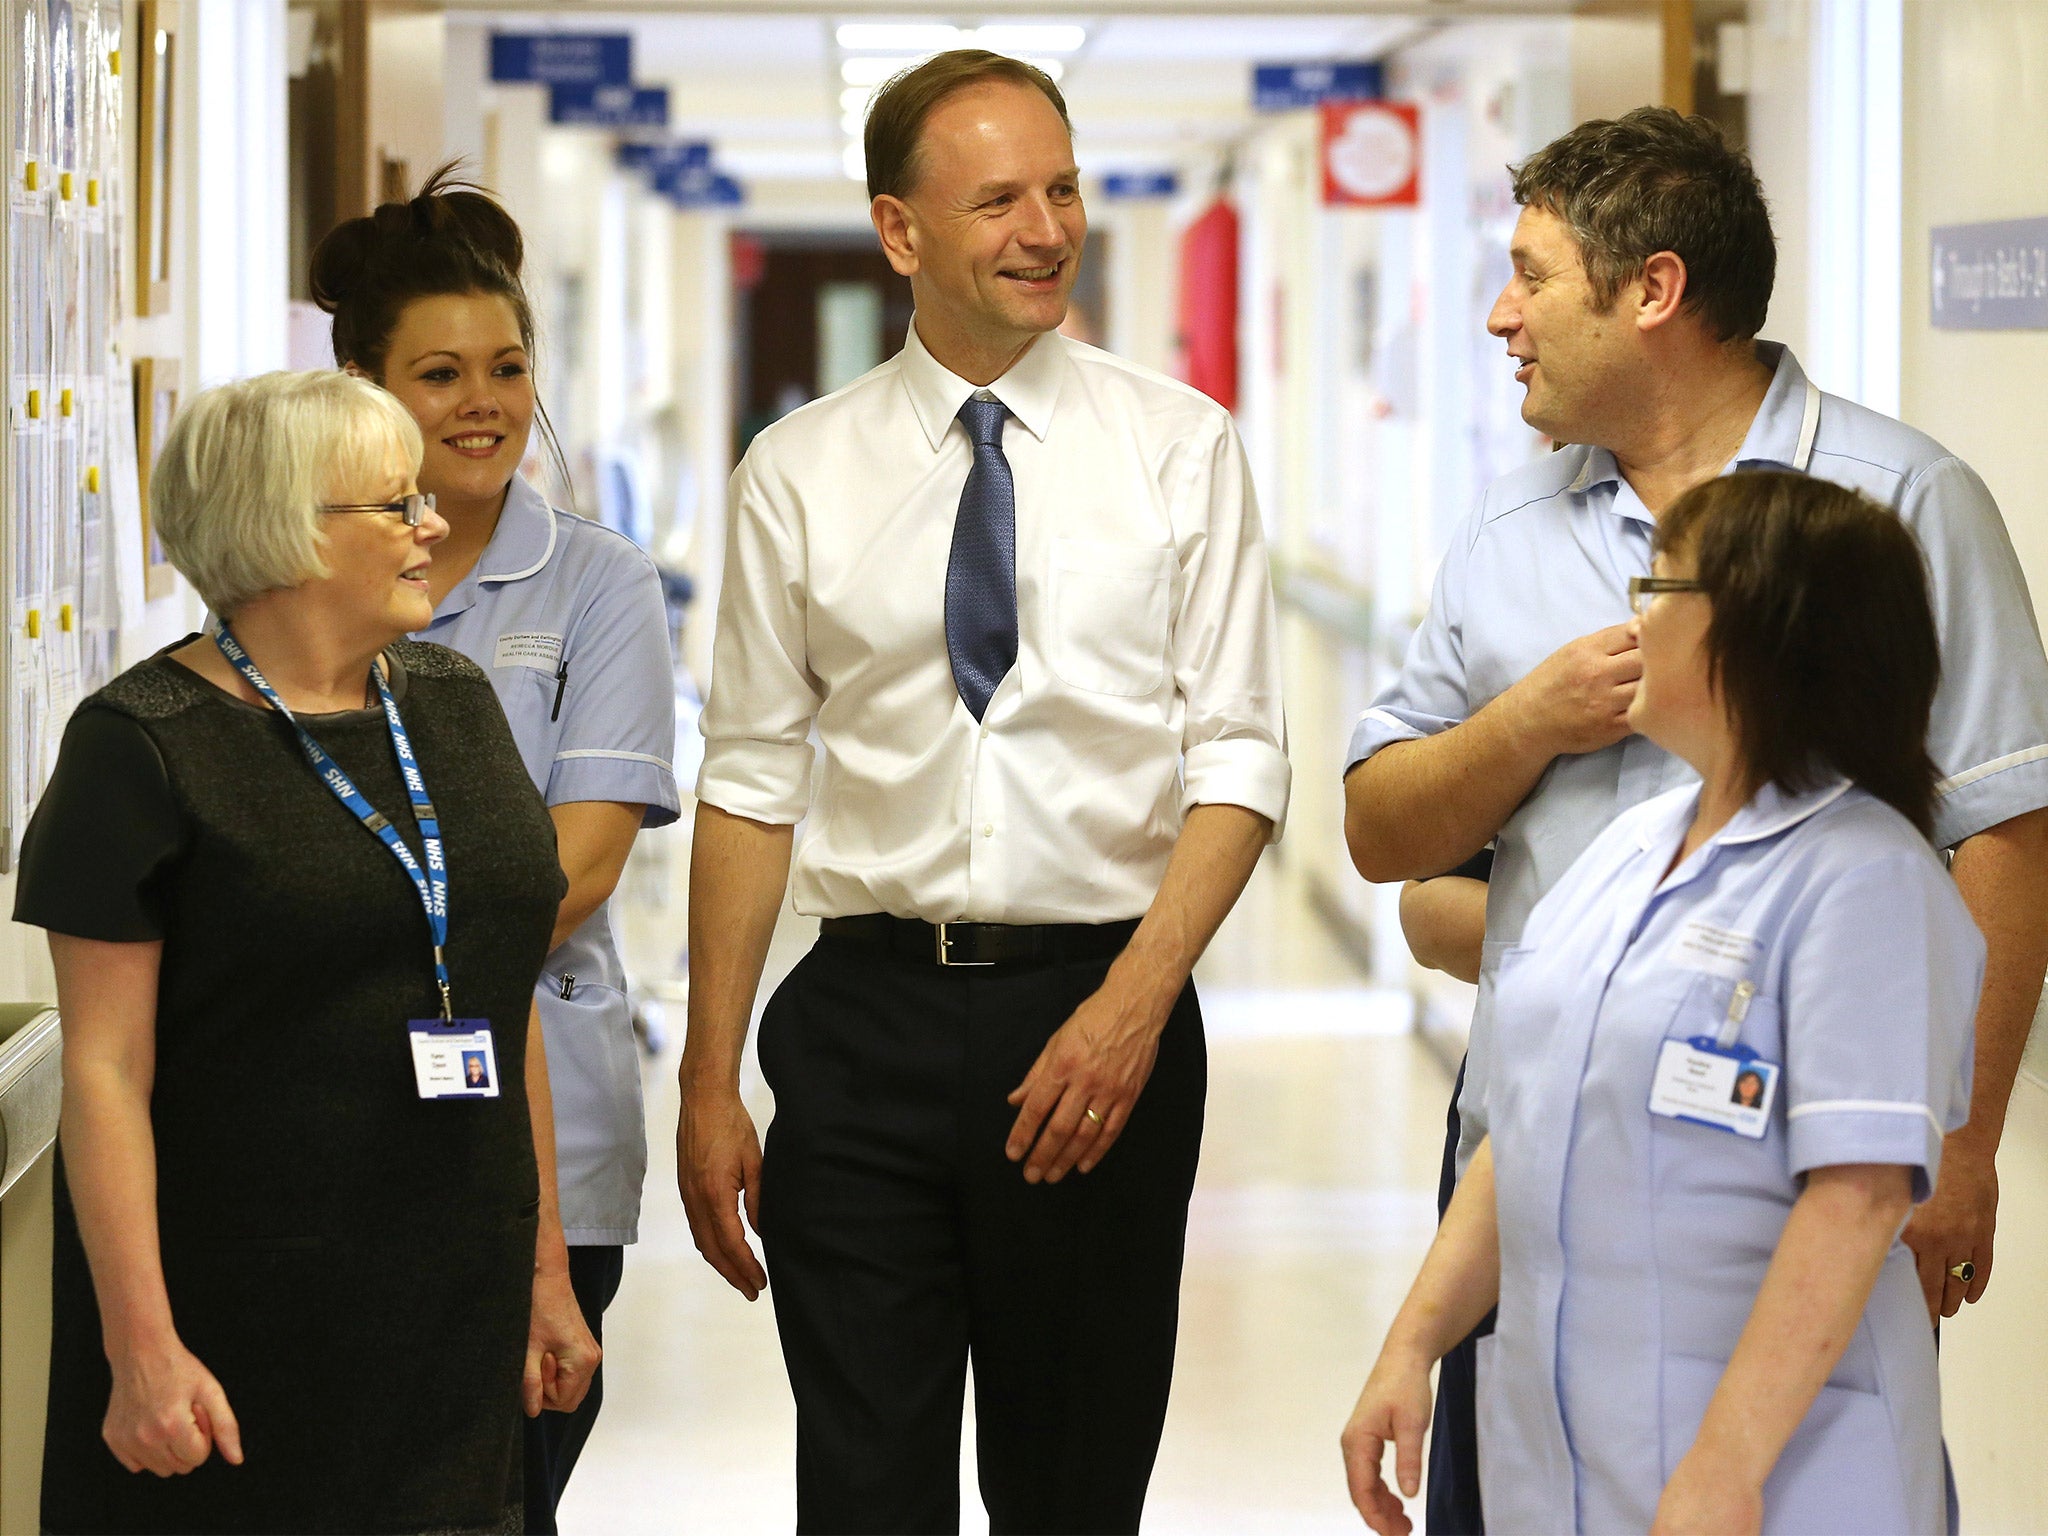 NHS chief executive Simon Stevens during a visit to Consett Medical Centre in County Durham, last year